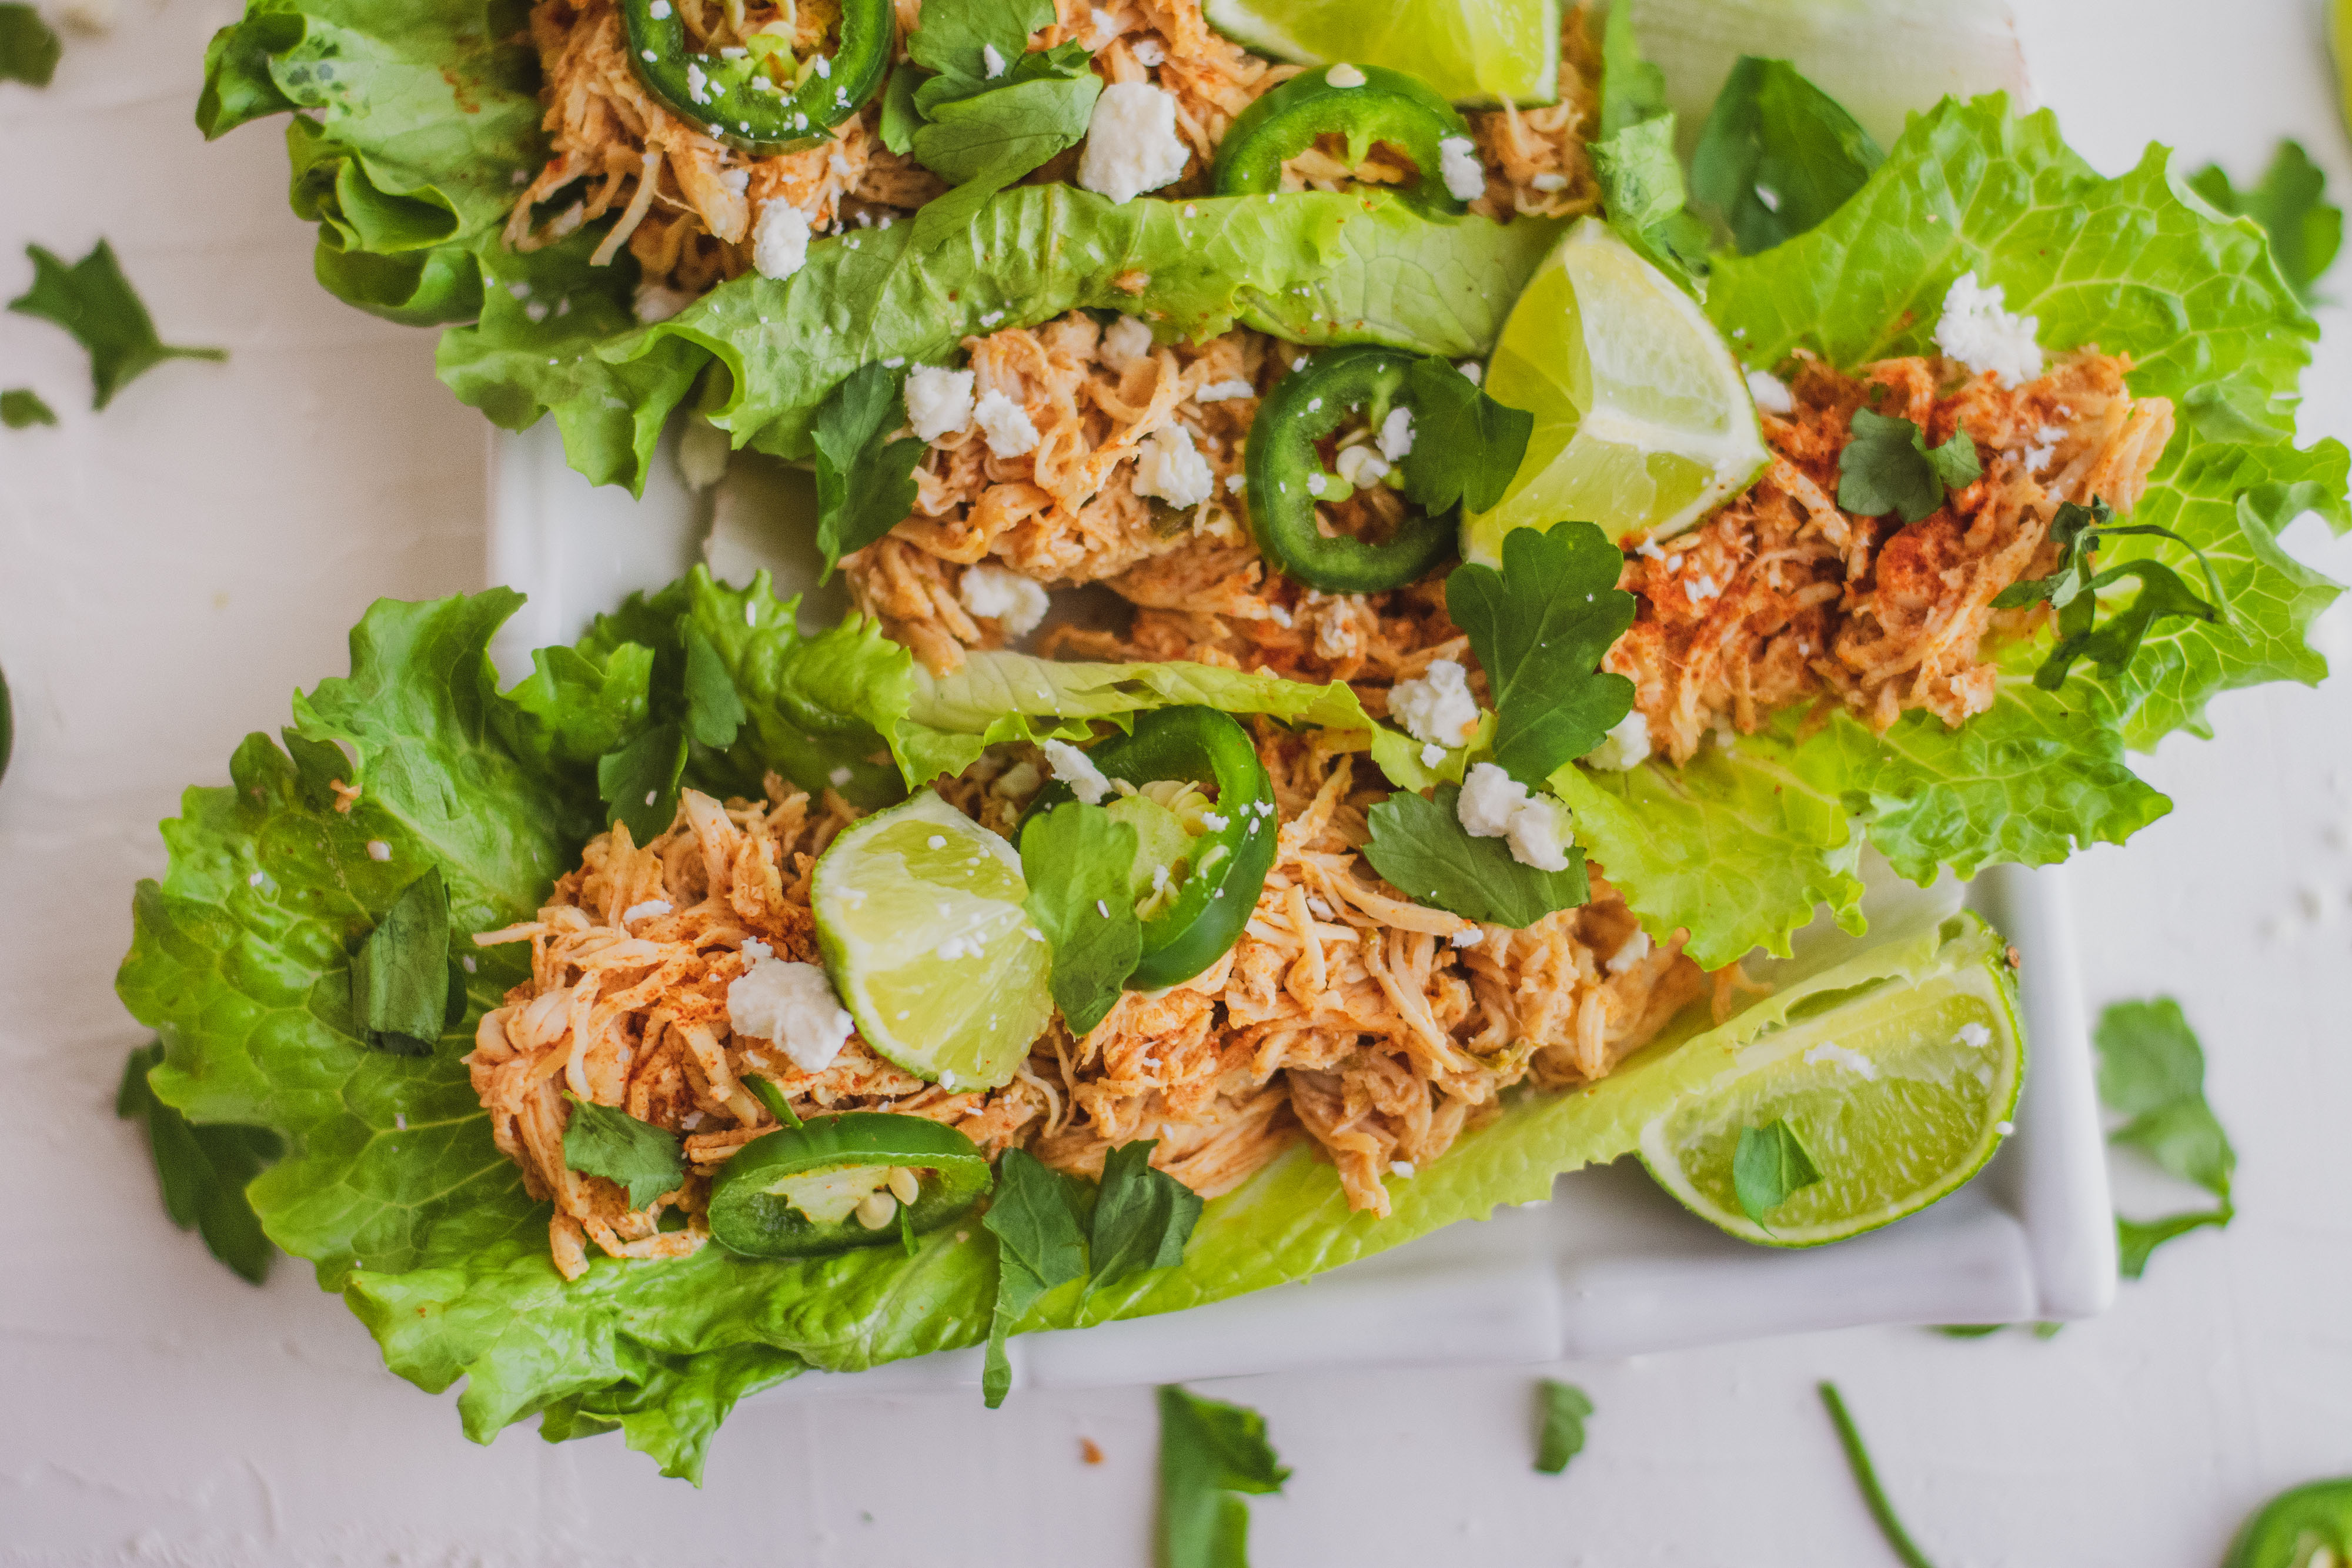 Shredded chicken tacos in lettuce wraps with fetta cheese, limes and jalapenos on top